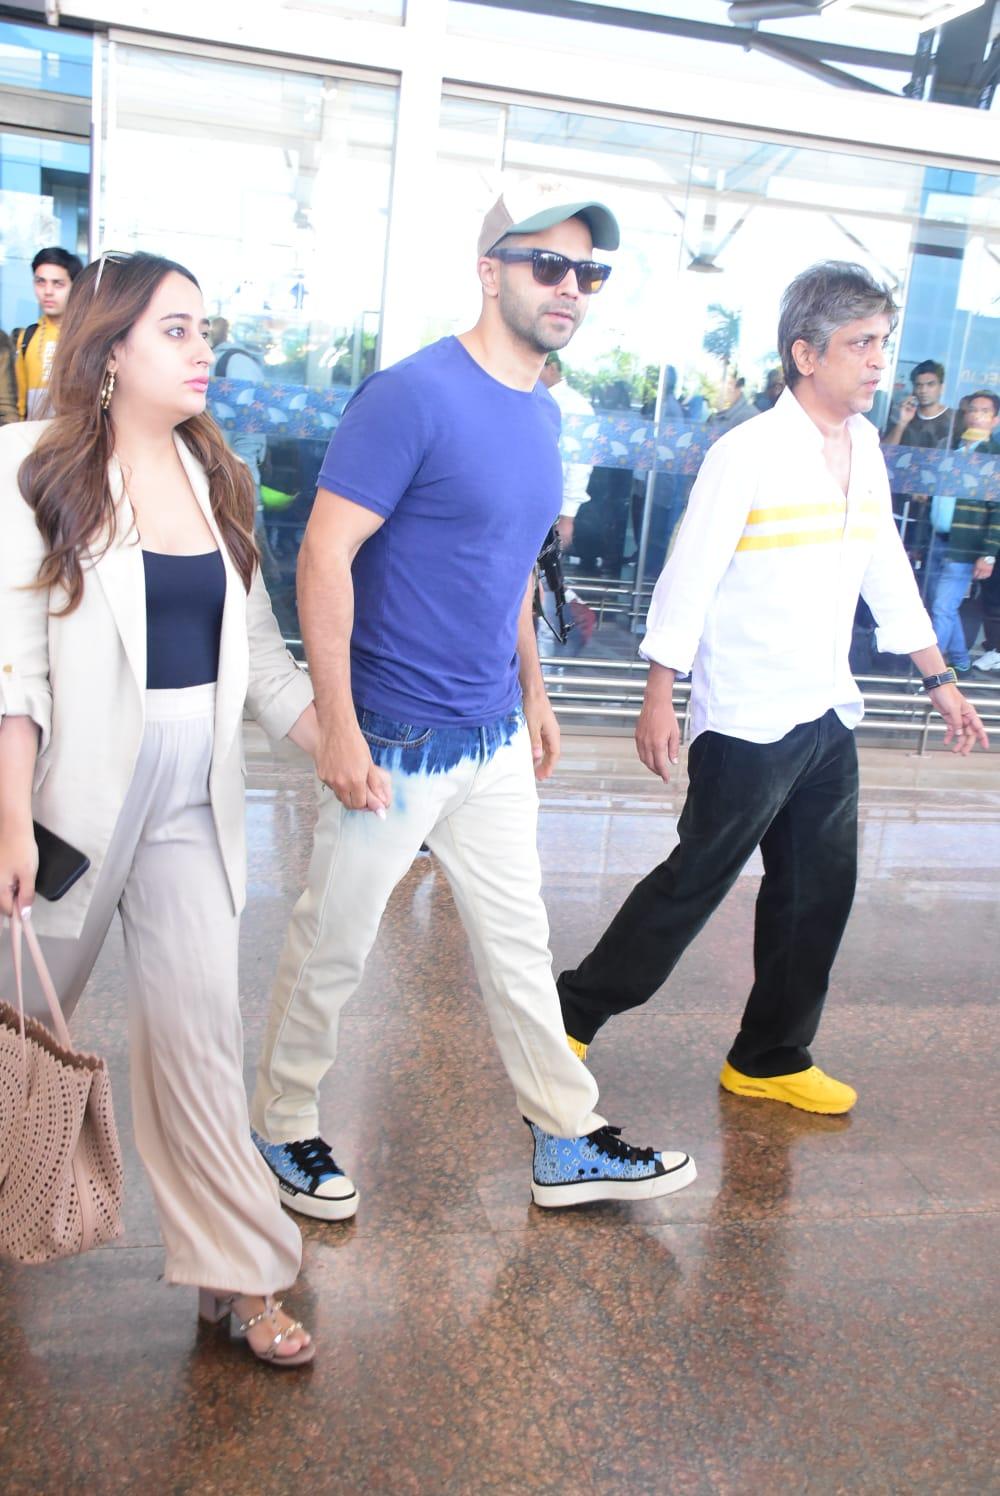 On Monday, actor Varun Dhawan and his wife Natasha Dalal were seen arriving in Goa for the ceremony. Varun Dhawan was seen dressed in a simple blue t-shirt and pants for his flight to Goa. He was accompanied by his wife Natasha